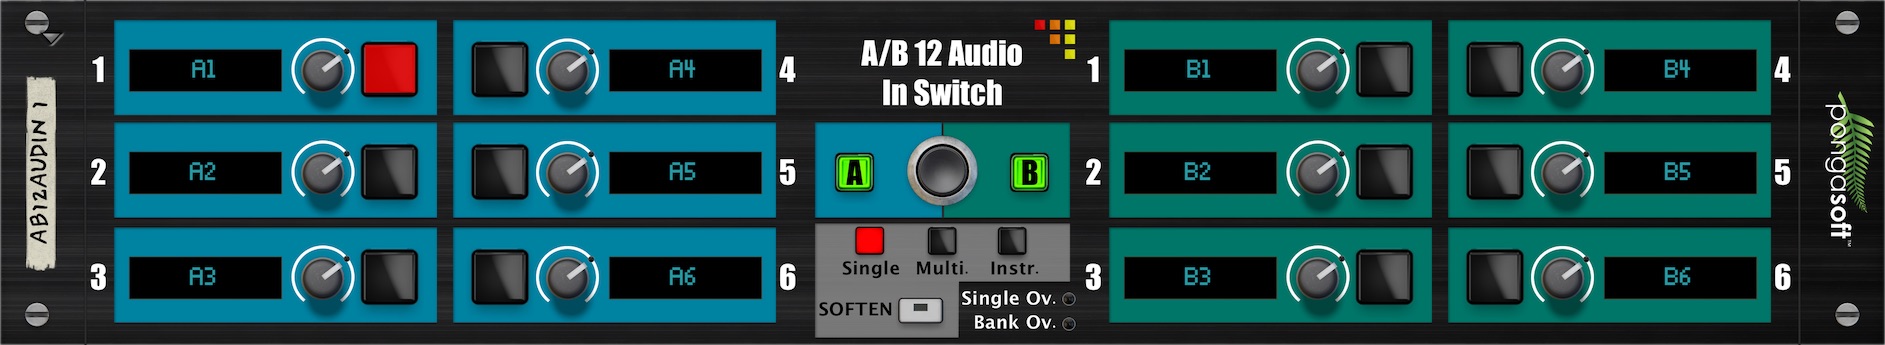 A/B 12 Audio In Switch (Front)